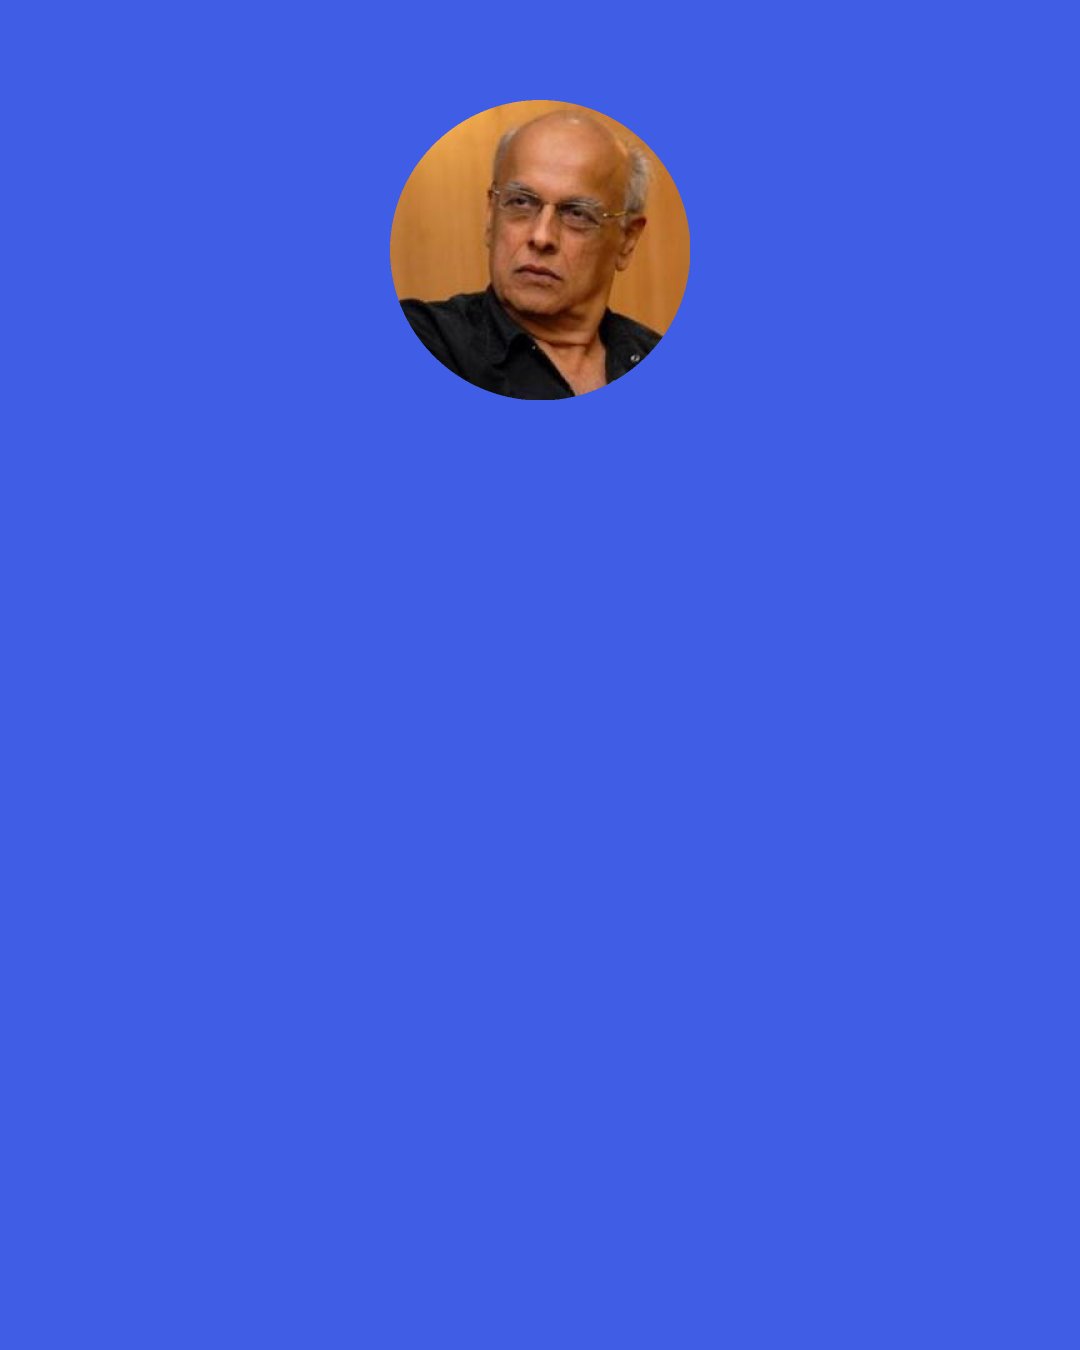 Mahesh Bhatt: My teacher once told me – ”No one is perfect……..that is why pencils have erasers.”